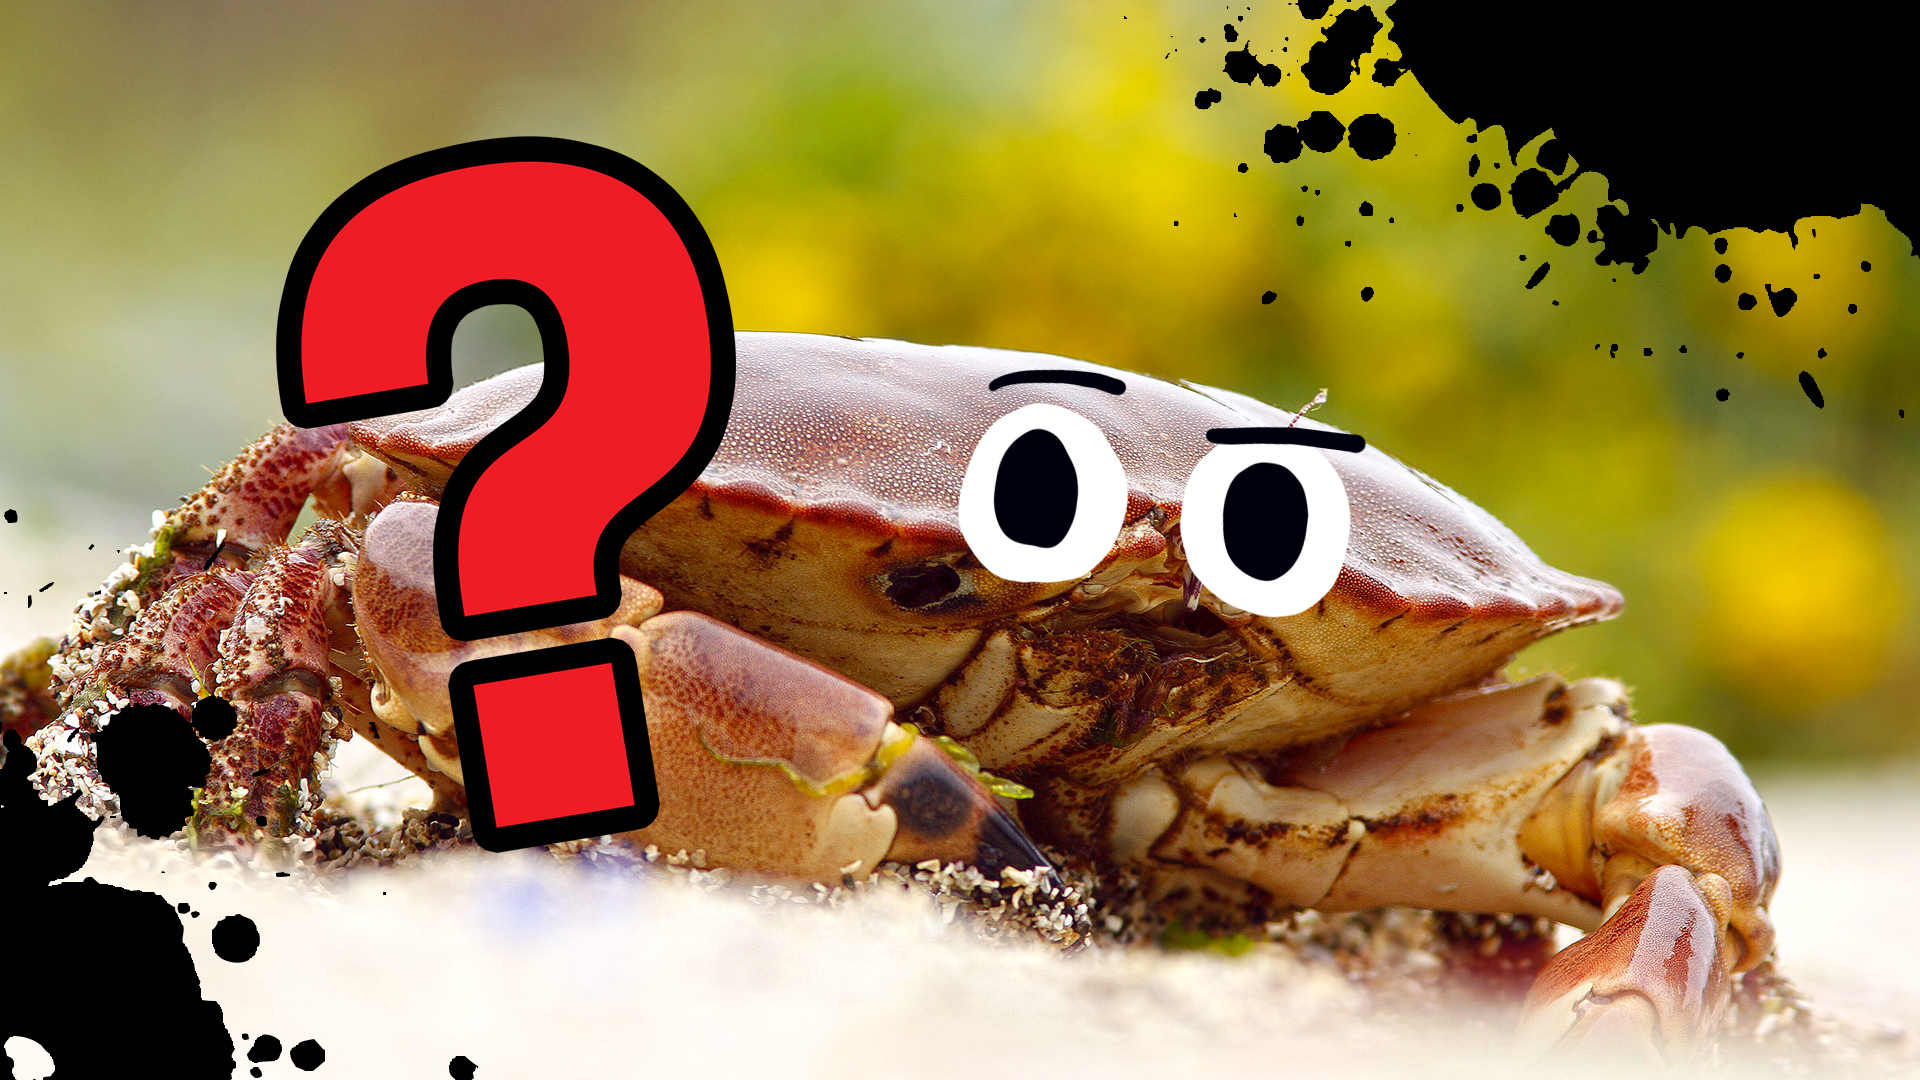 A brown crab looks confused